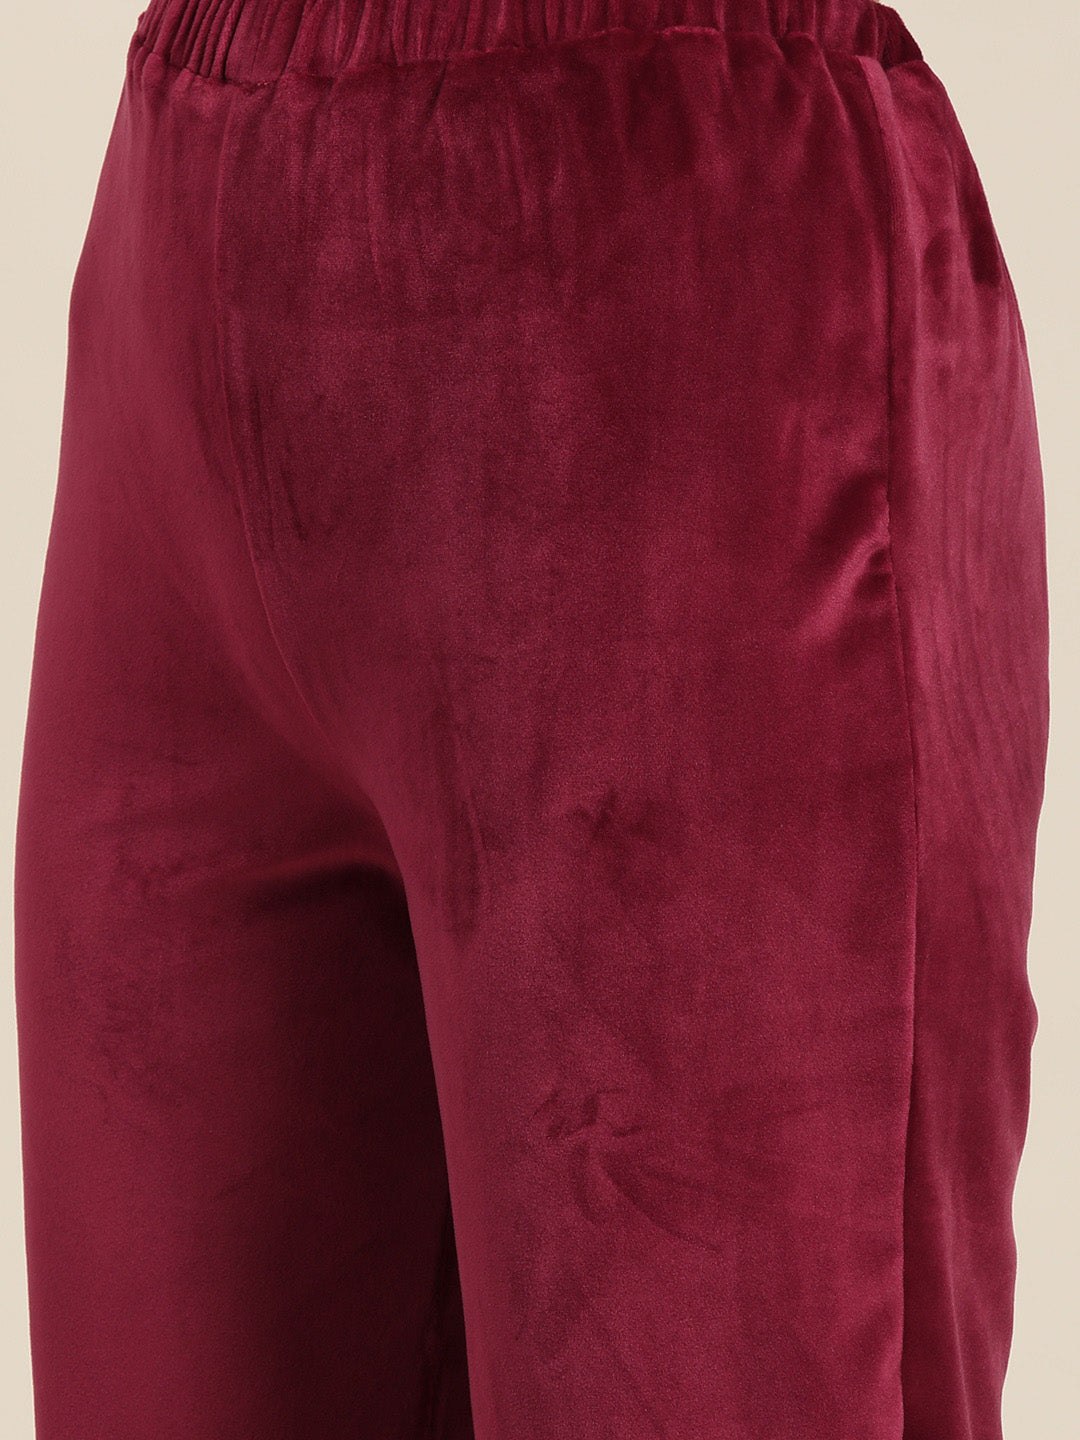 Maroon solid velvet fabric with a front patch pocket. hoodie with co-ord set.